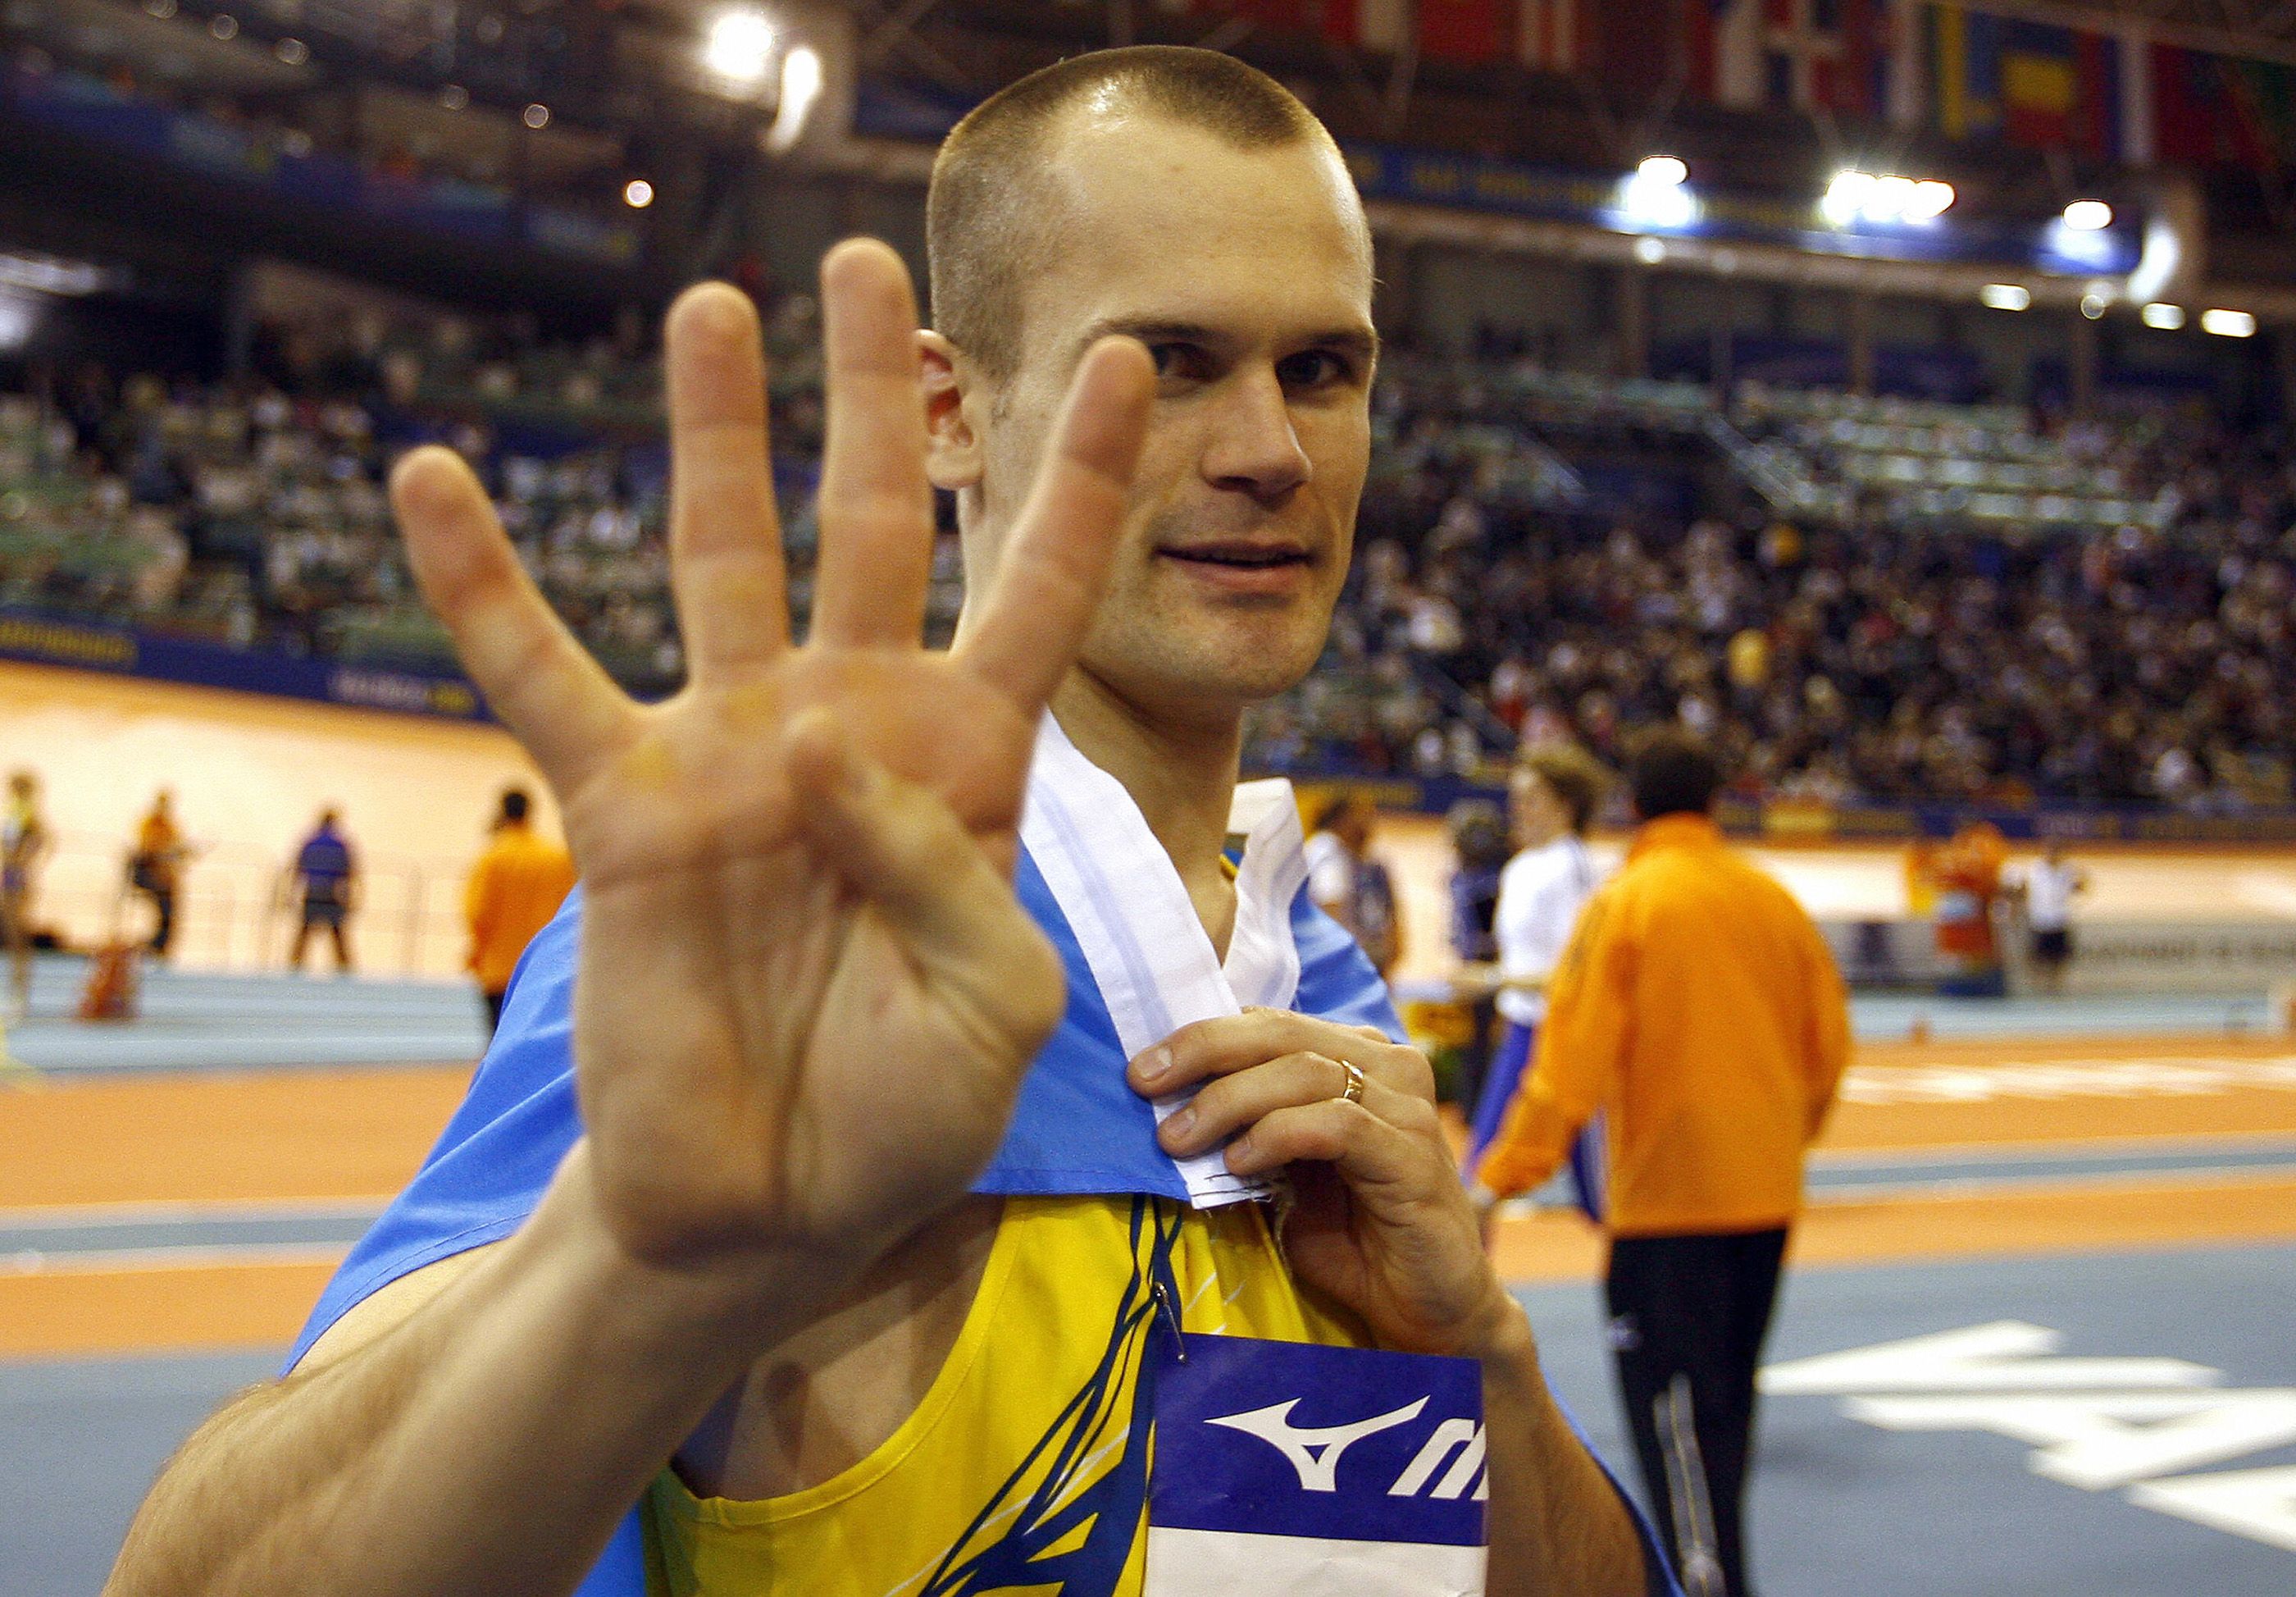 Stefan Holm celebrates his fourth world indoor title win in Valencia